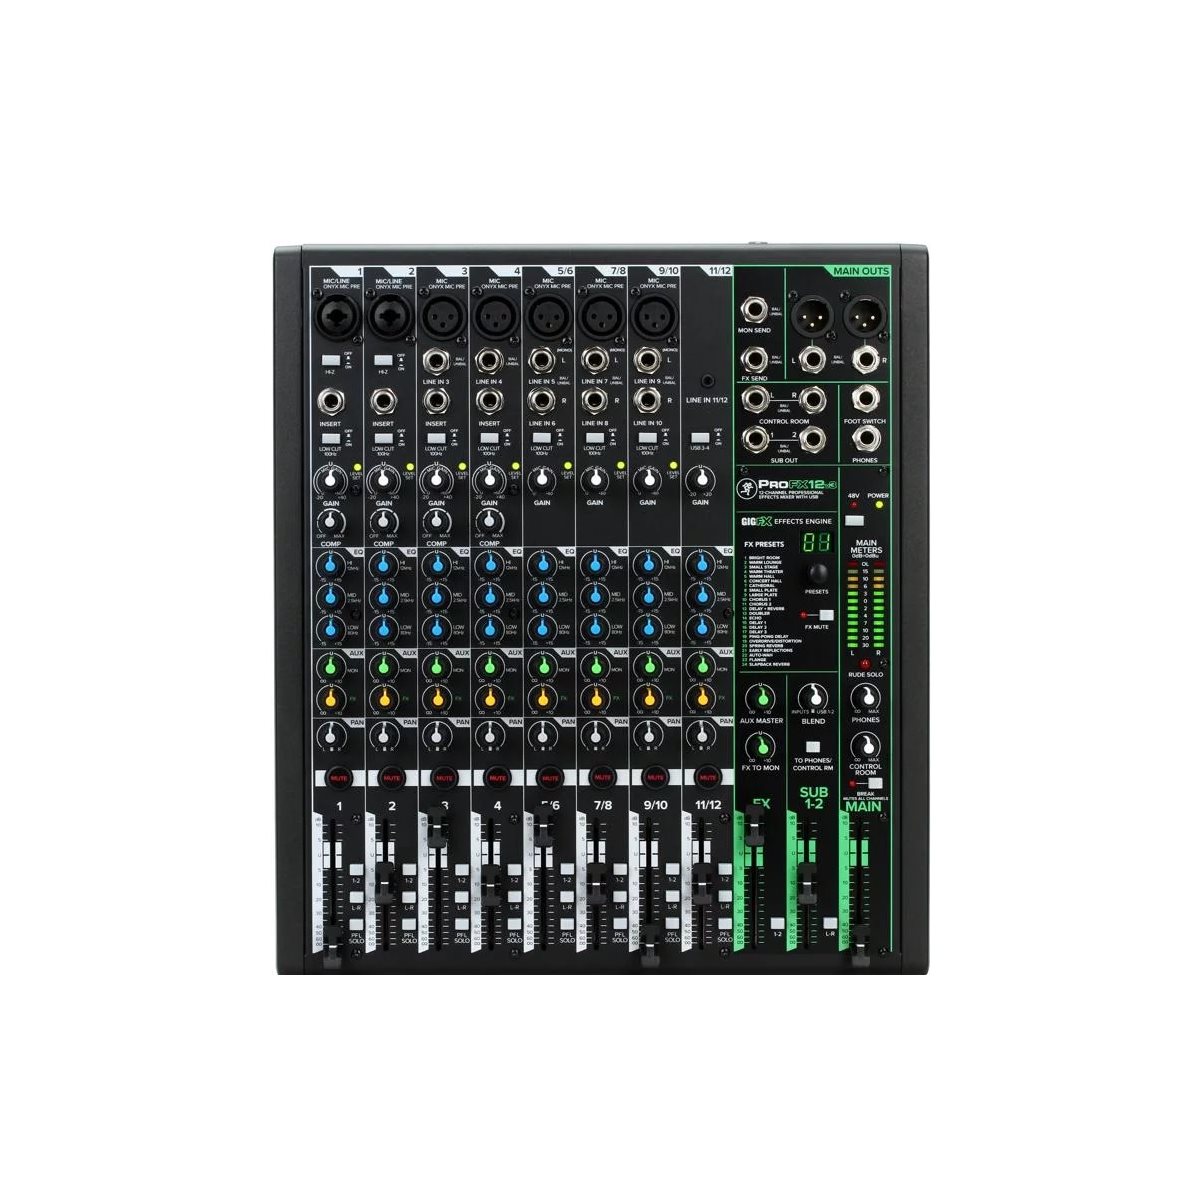 MACKIE - PROFX12V3 - 12-channel Mixer with USB and Effects